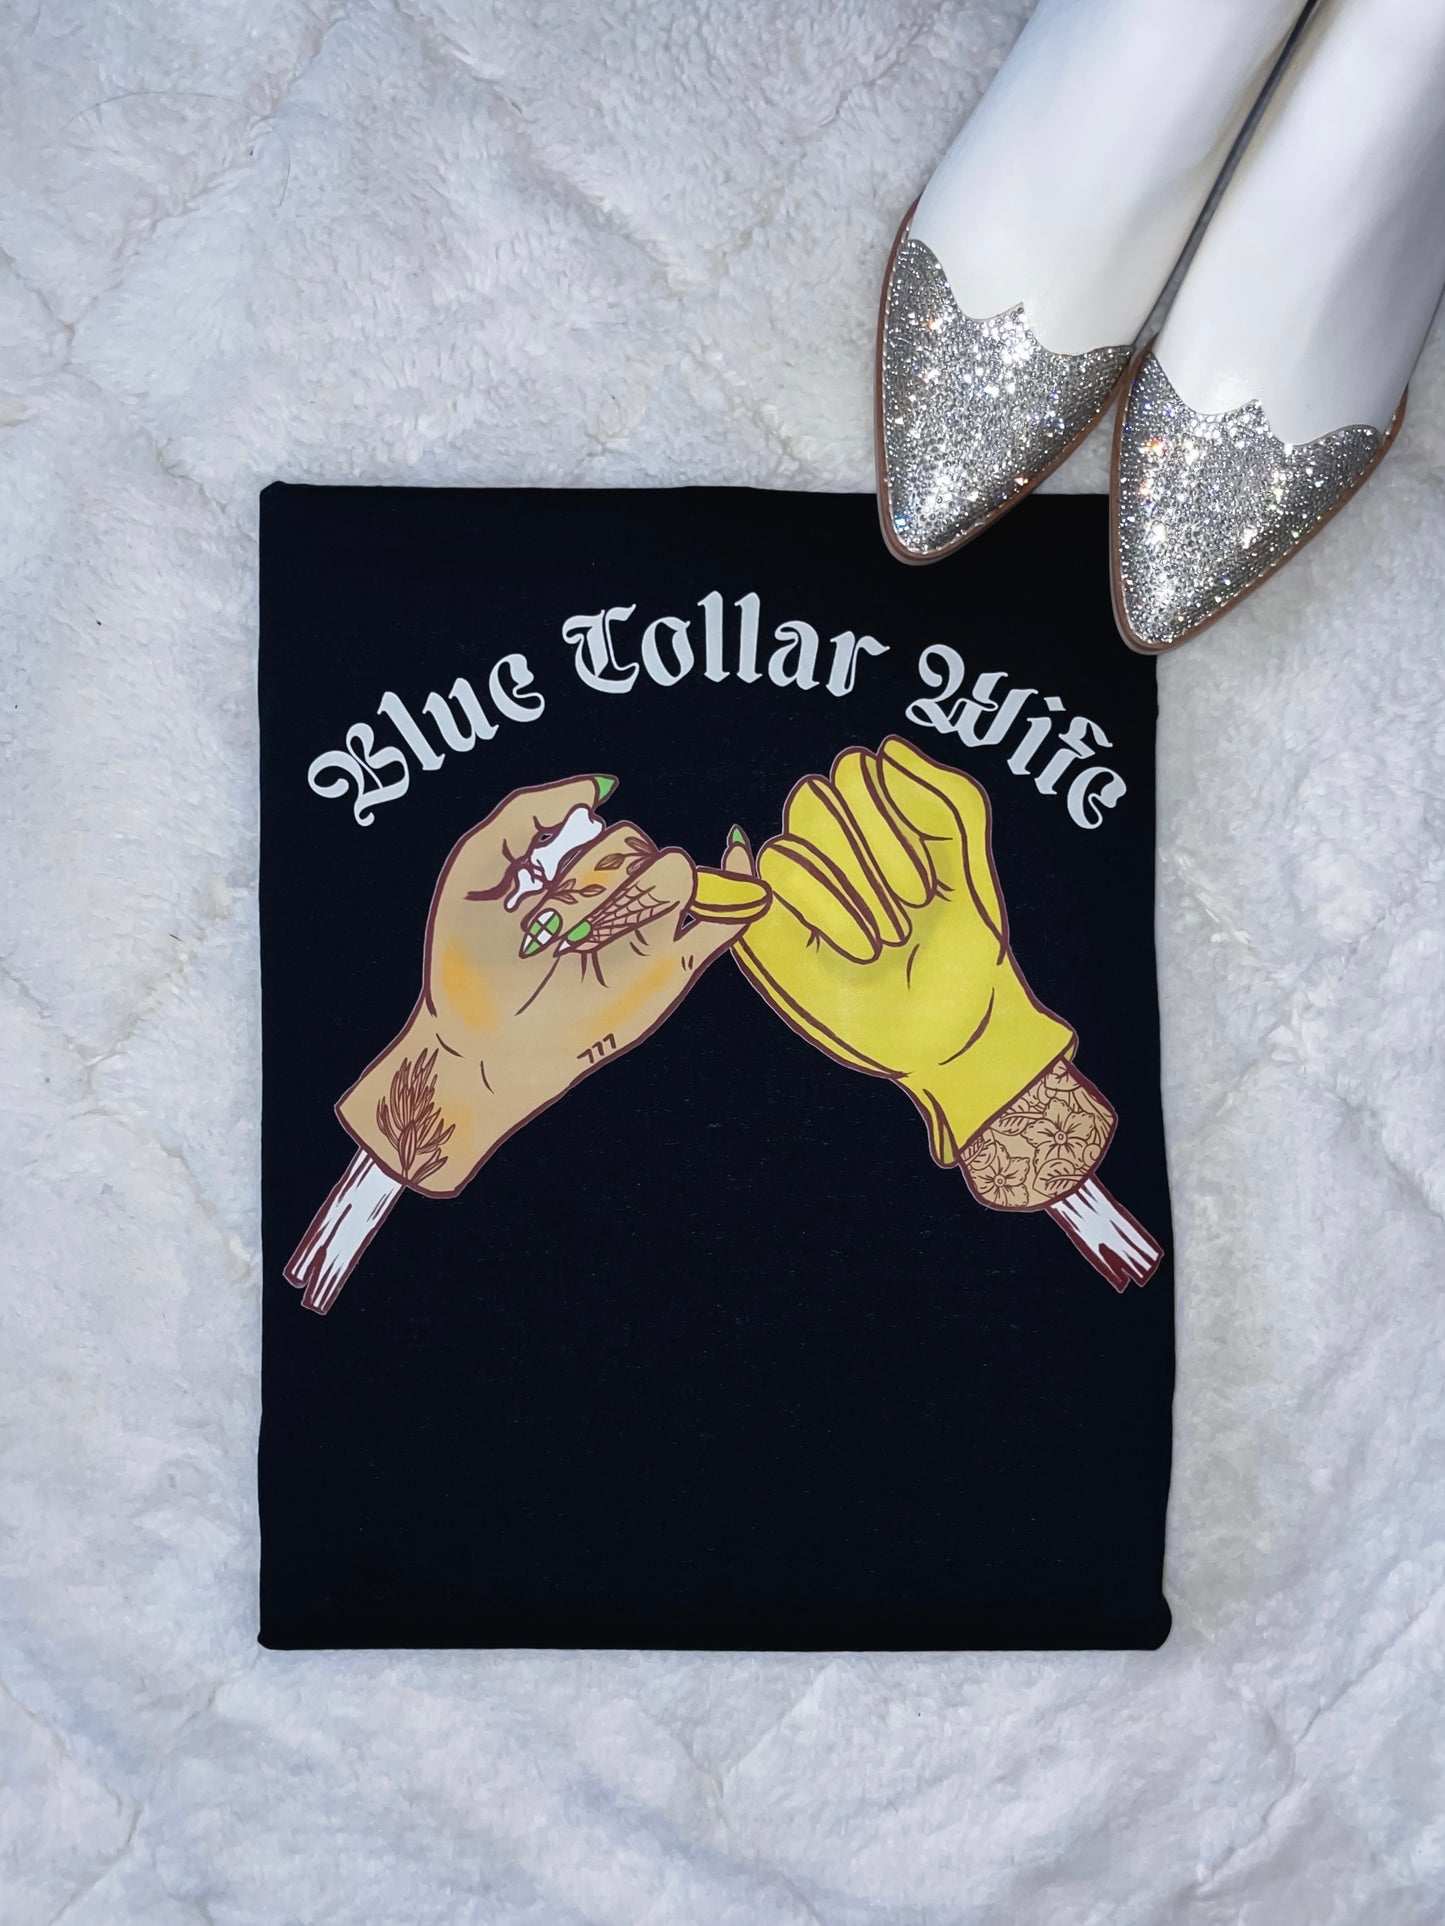 Blue Collar Wives Graphic Top